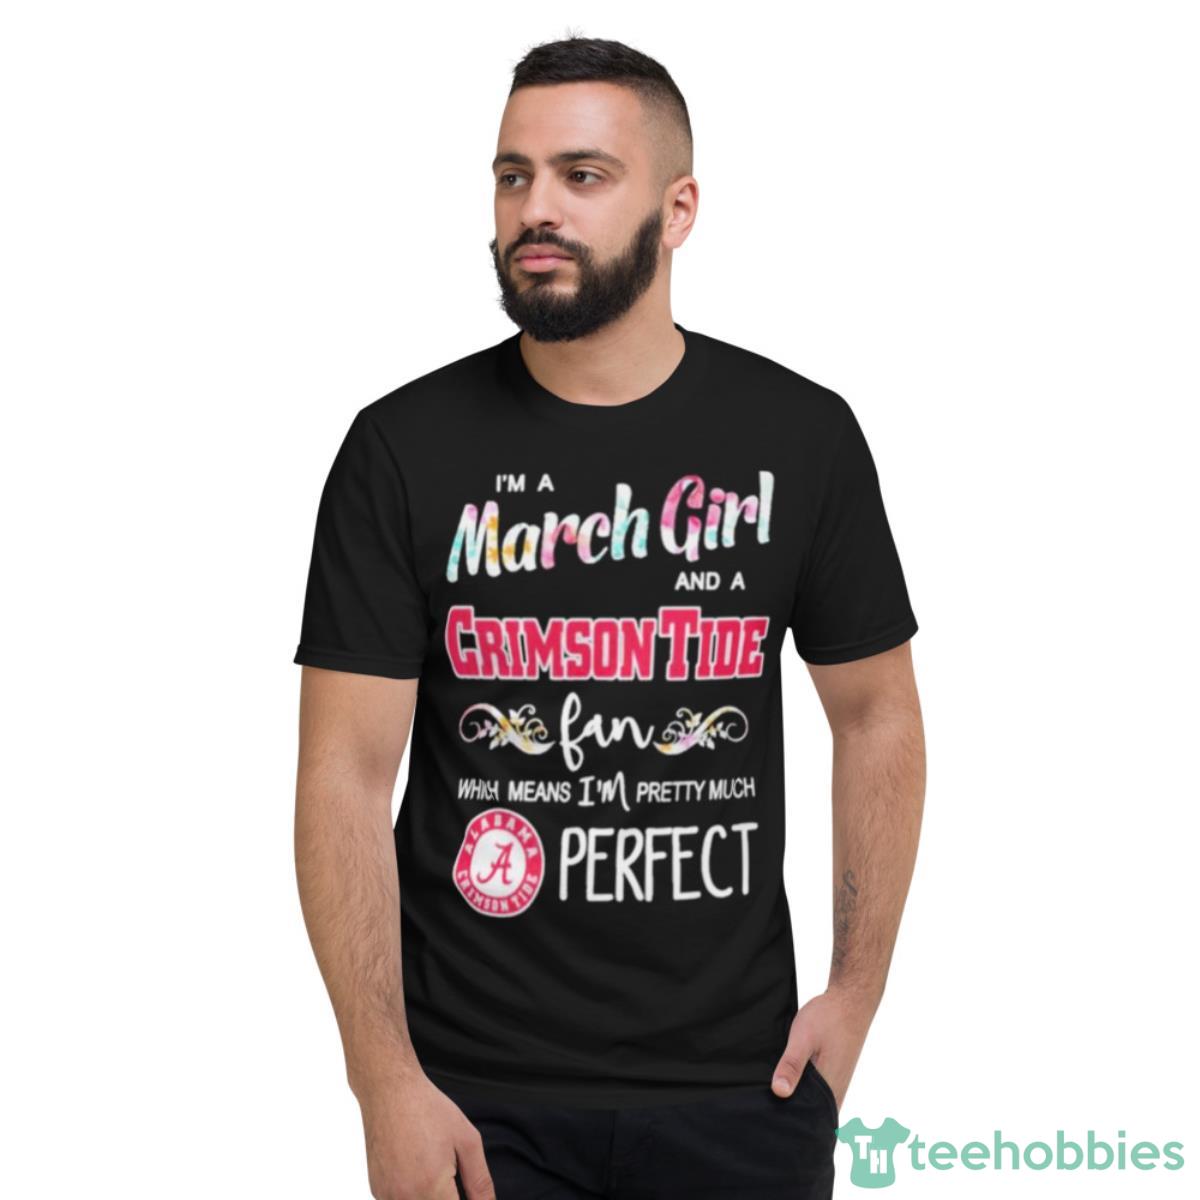 Im A March Girl And A Alabama Crimson Tide Fan Which Means Im Pretty Much Perfect Shirt - Short Sleeve T-Shirt